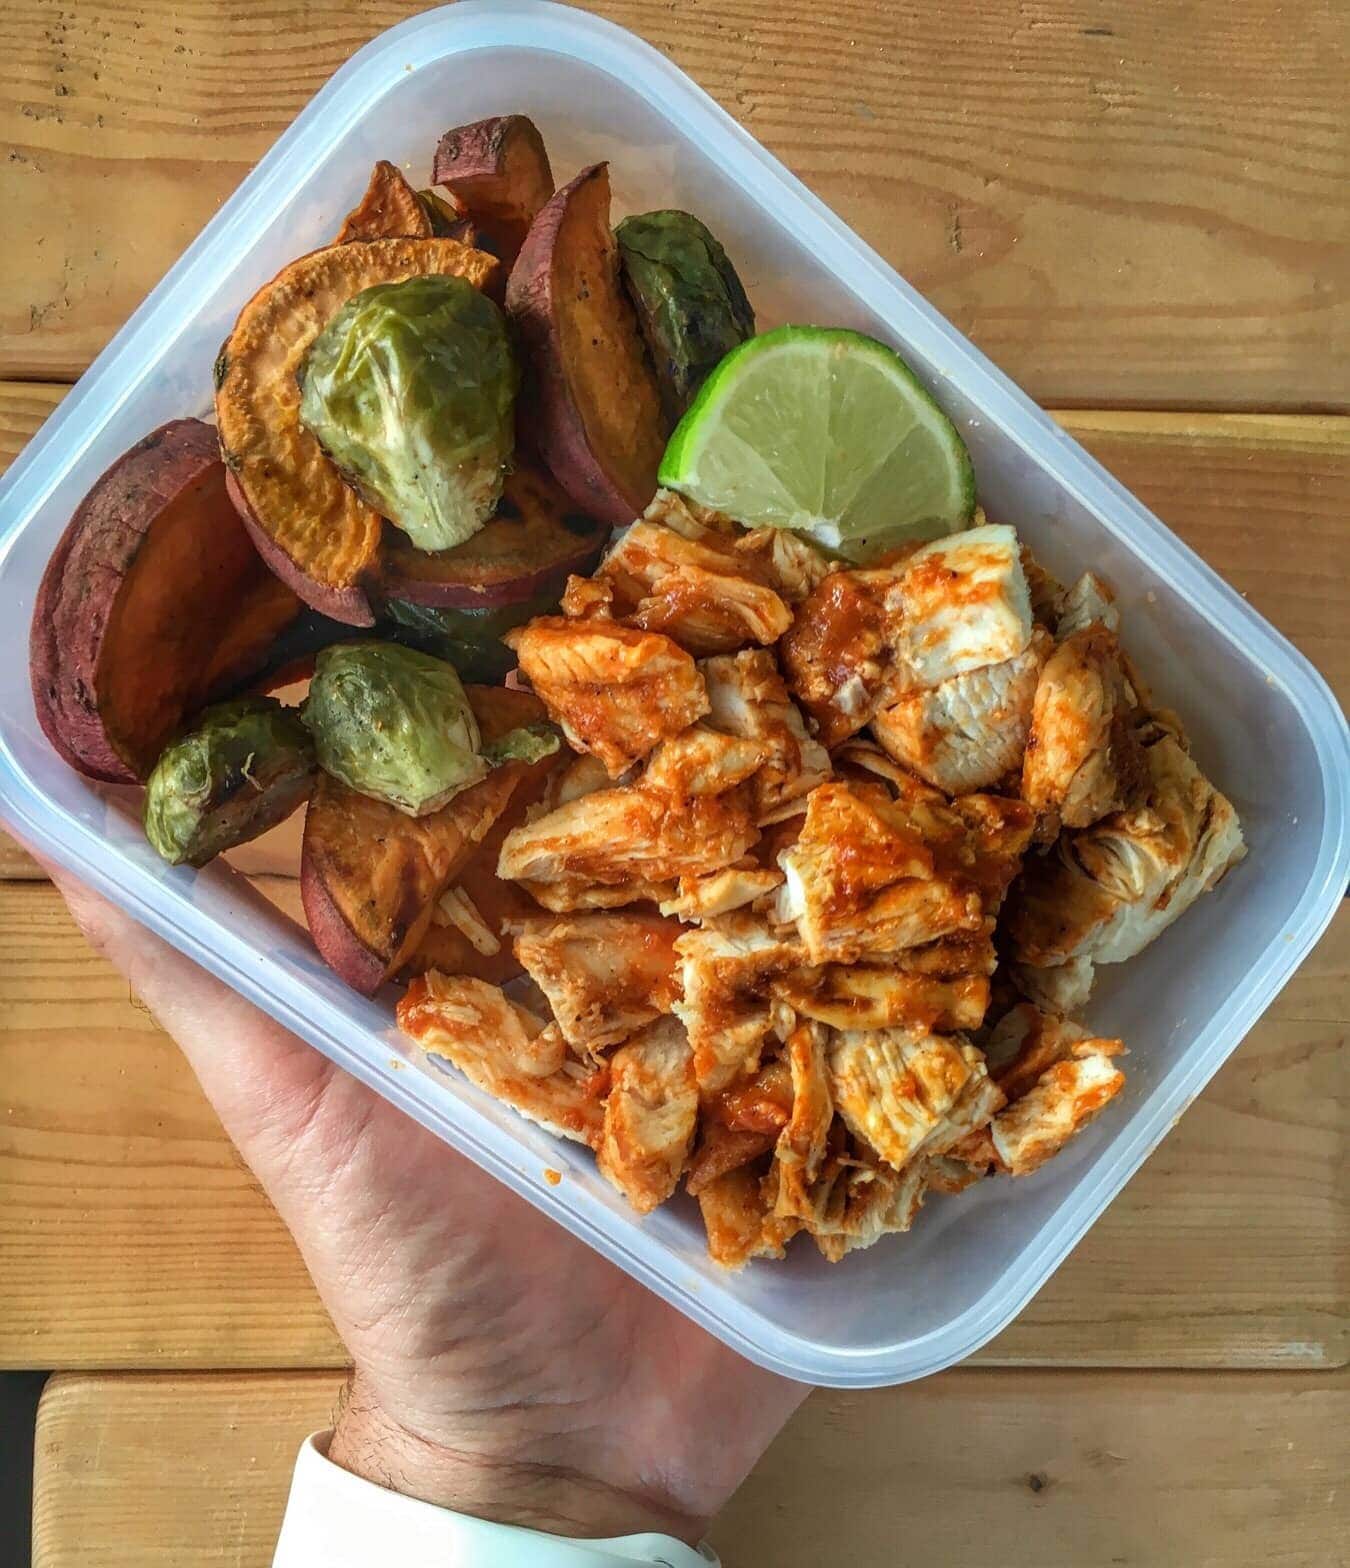 bbq chicken meal prep with brussels sprouts and sweet potato